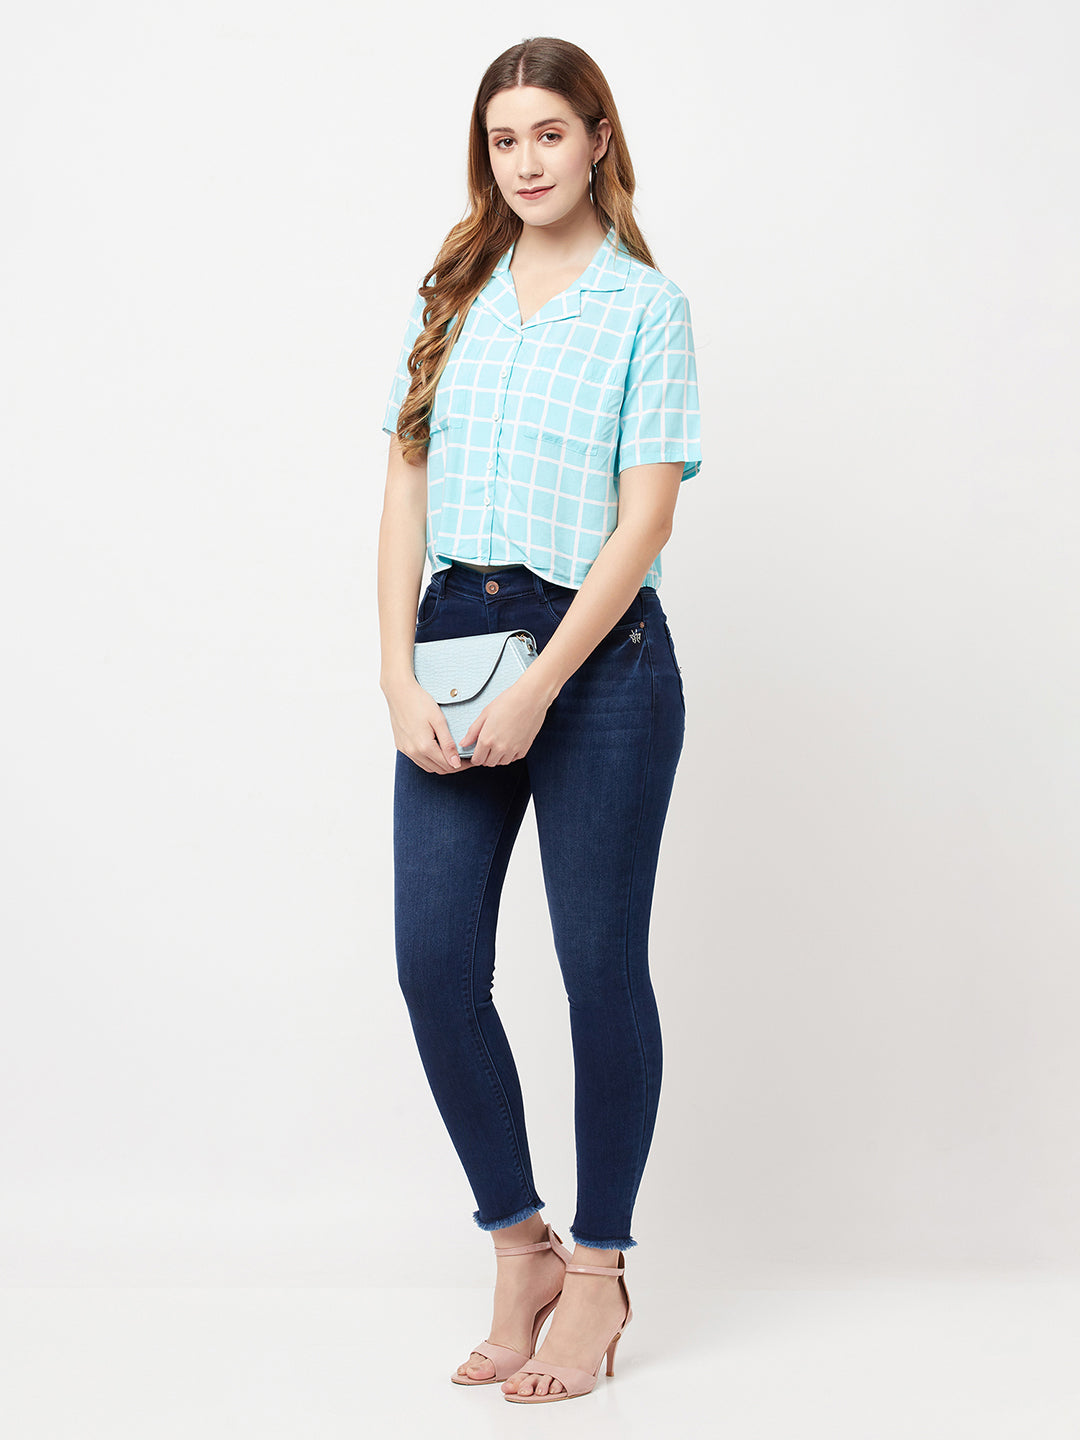 Mint-Green Graph Checked Cropped Top - Women Tops